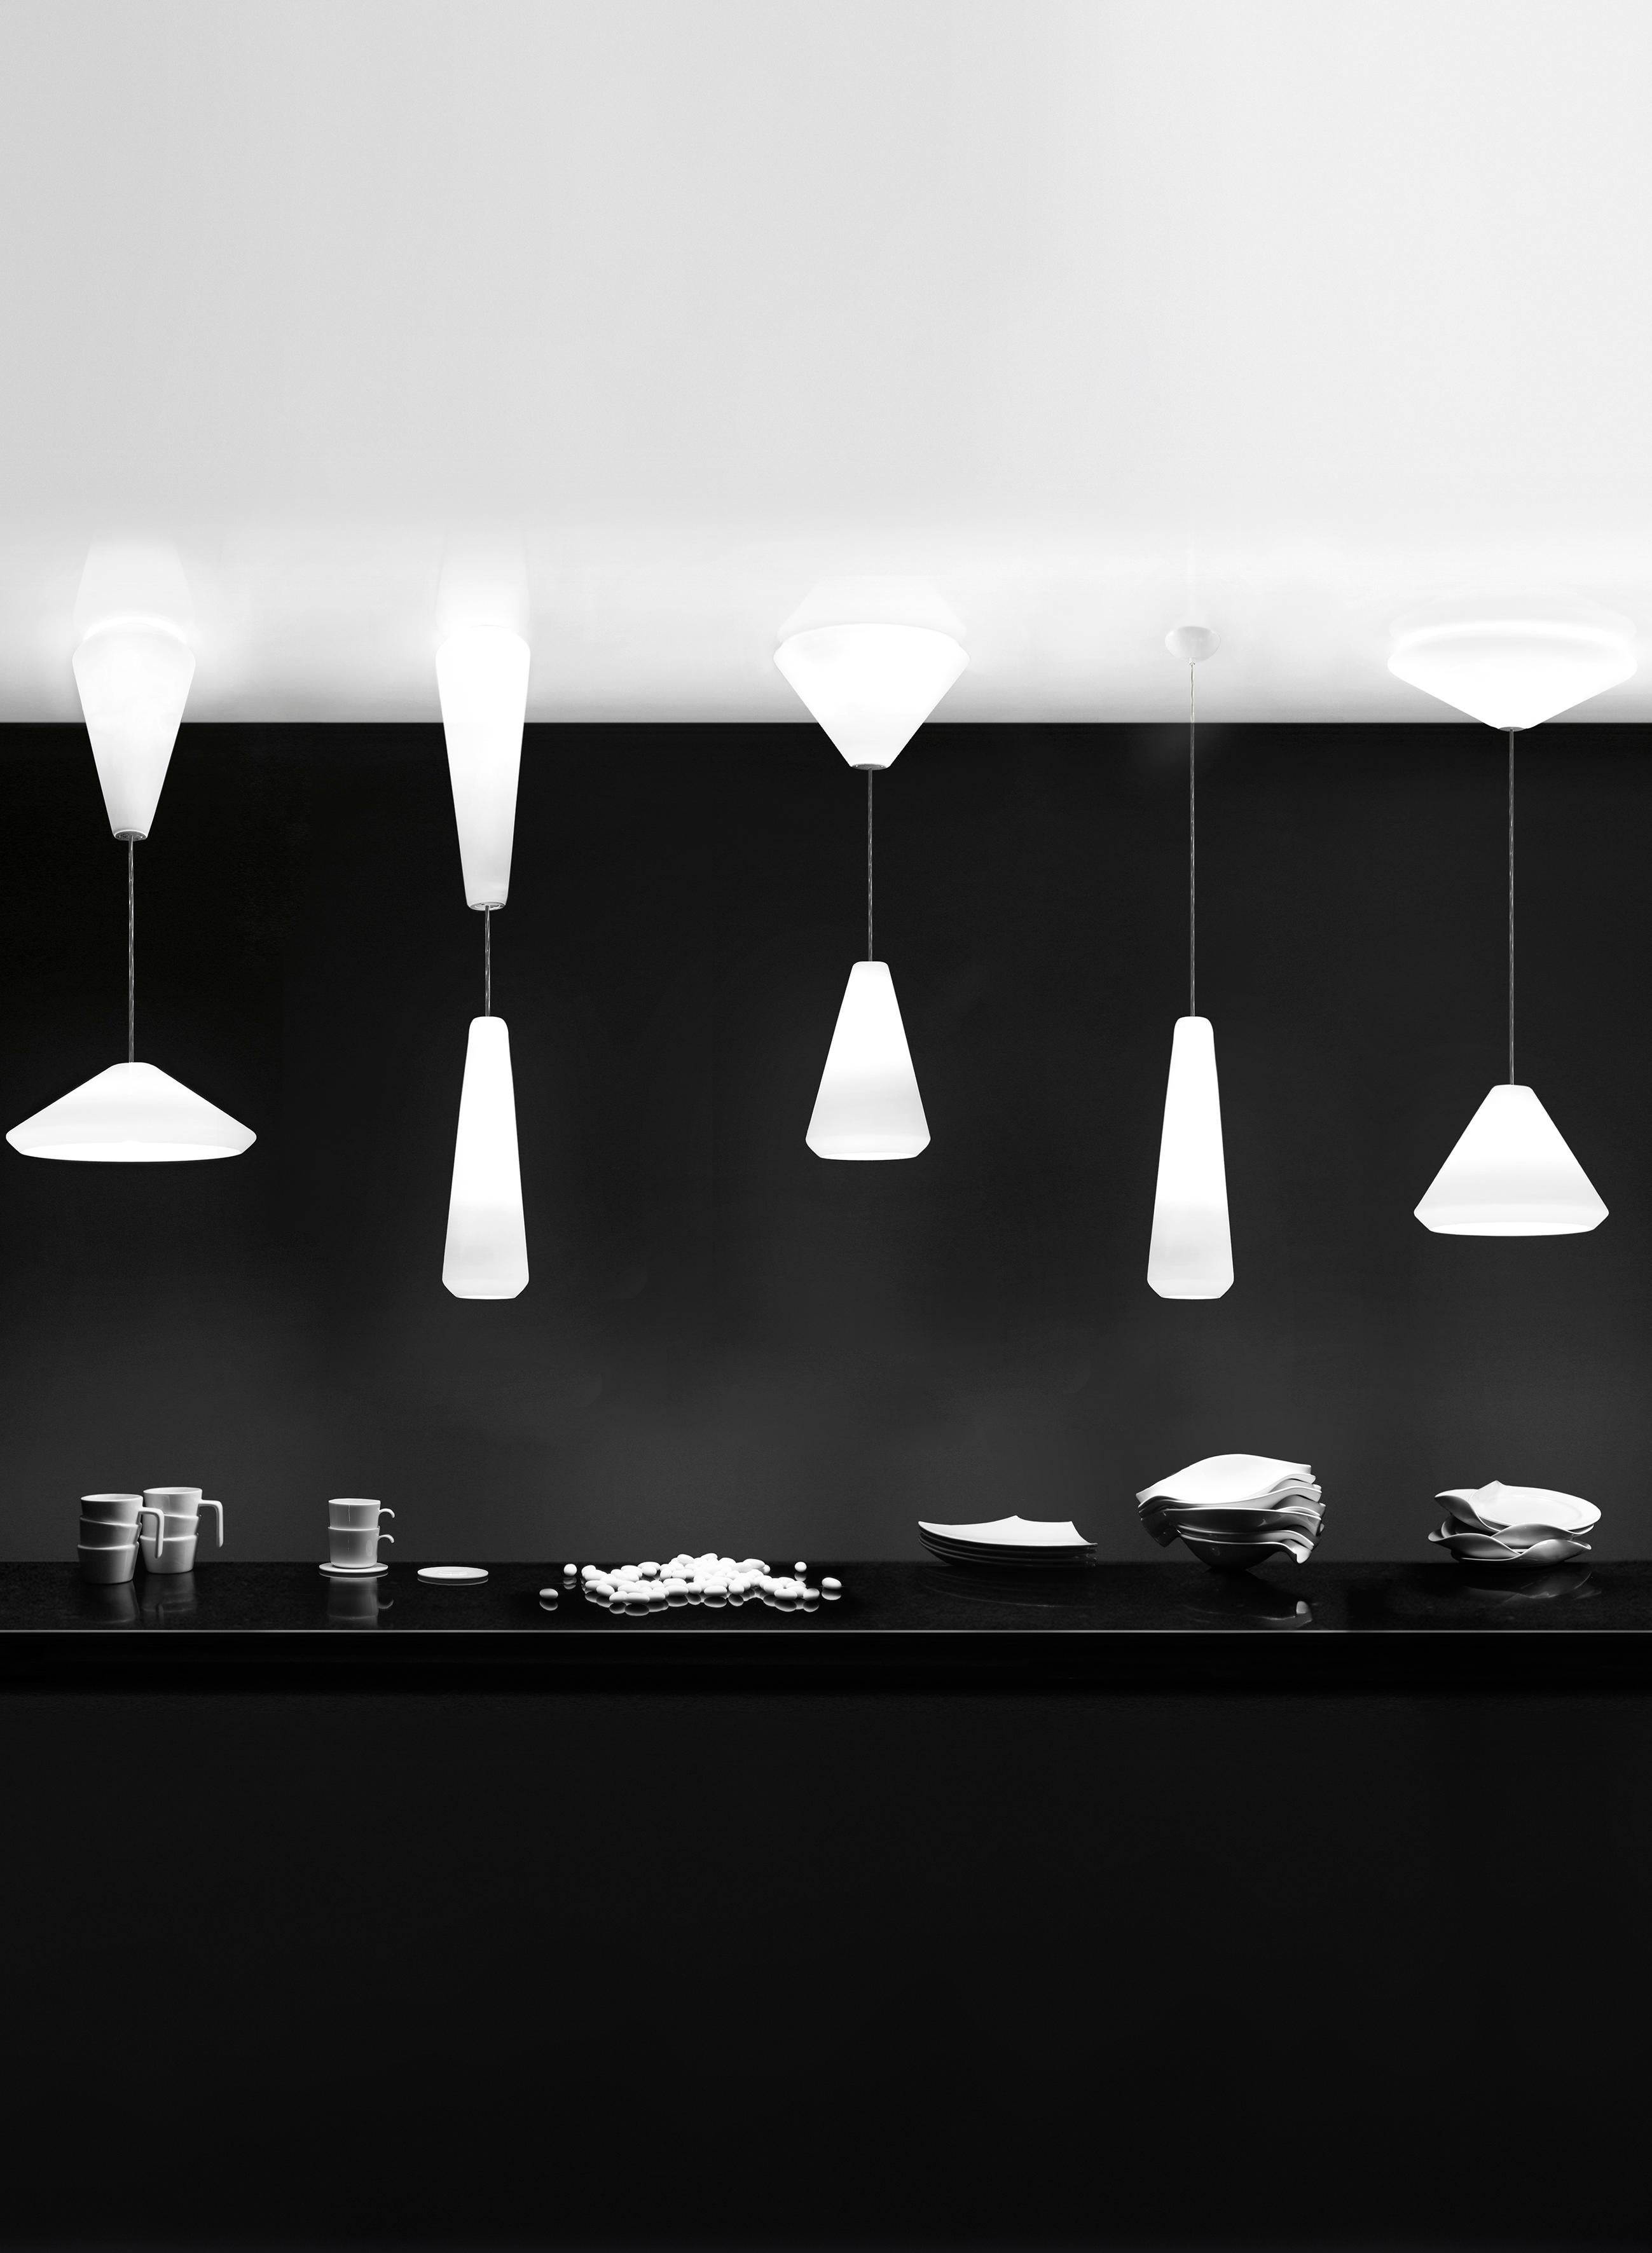 A collection of five single elements in satin-finish blown glass that can be installed as pendants or ceiling fixtures and are ideal for energy saving bulbs. The double glass versions allow a double switch system.

Specifications:
Material: